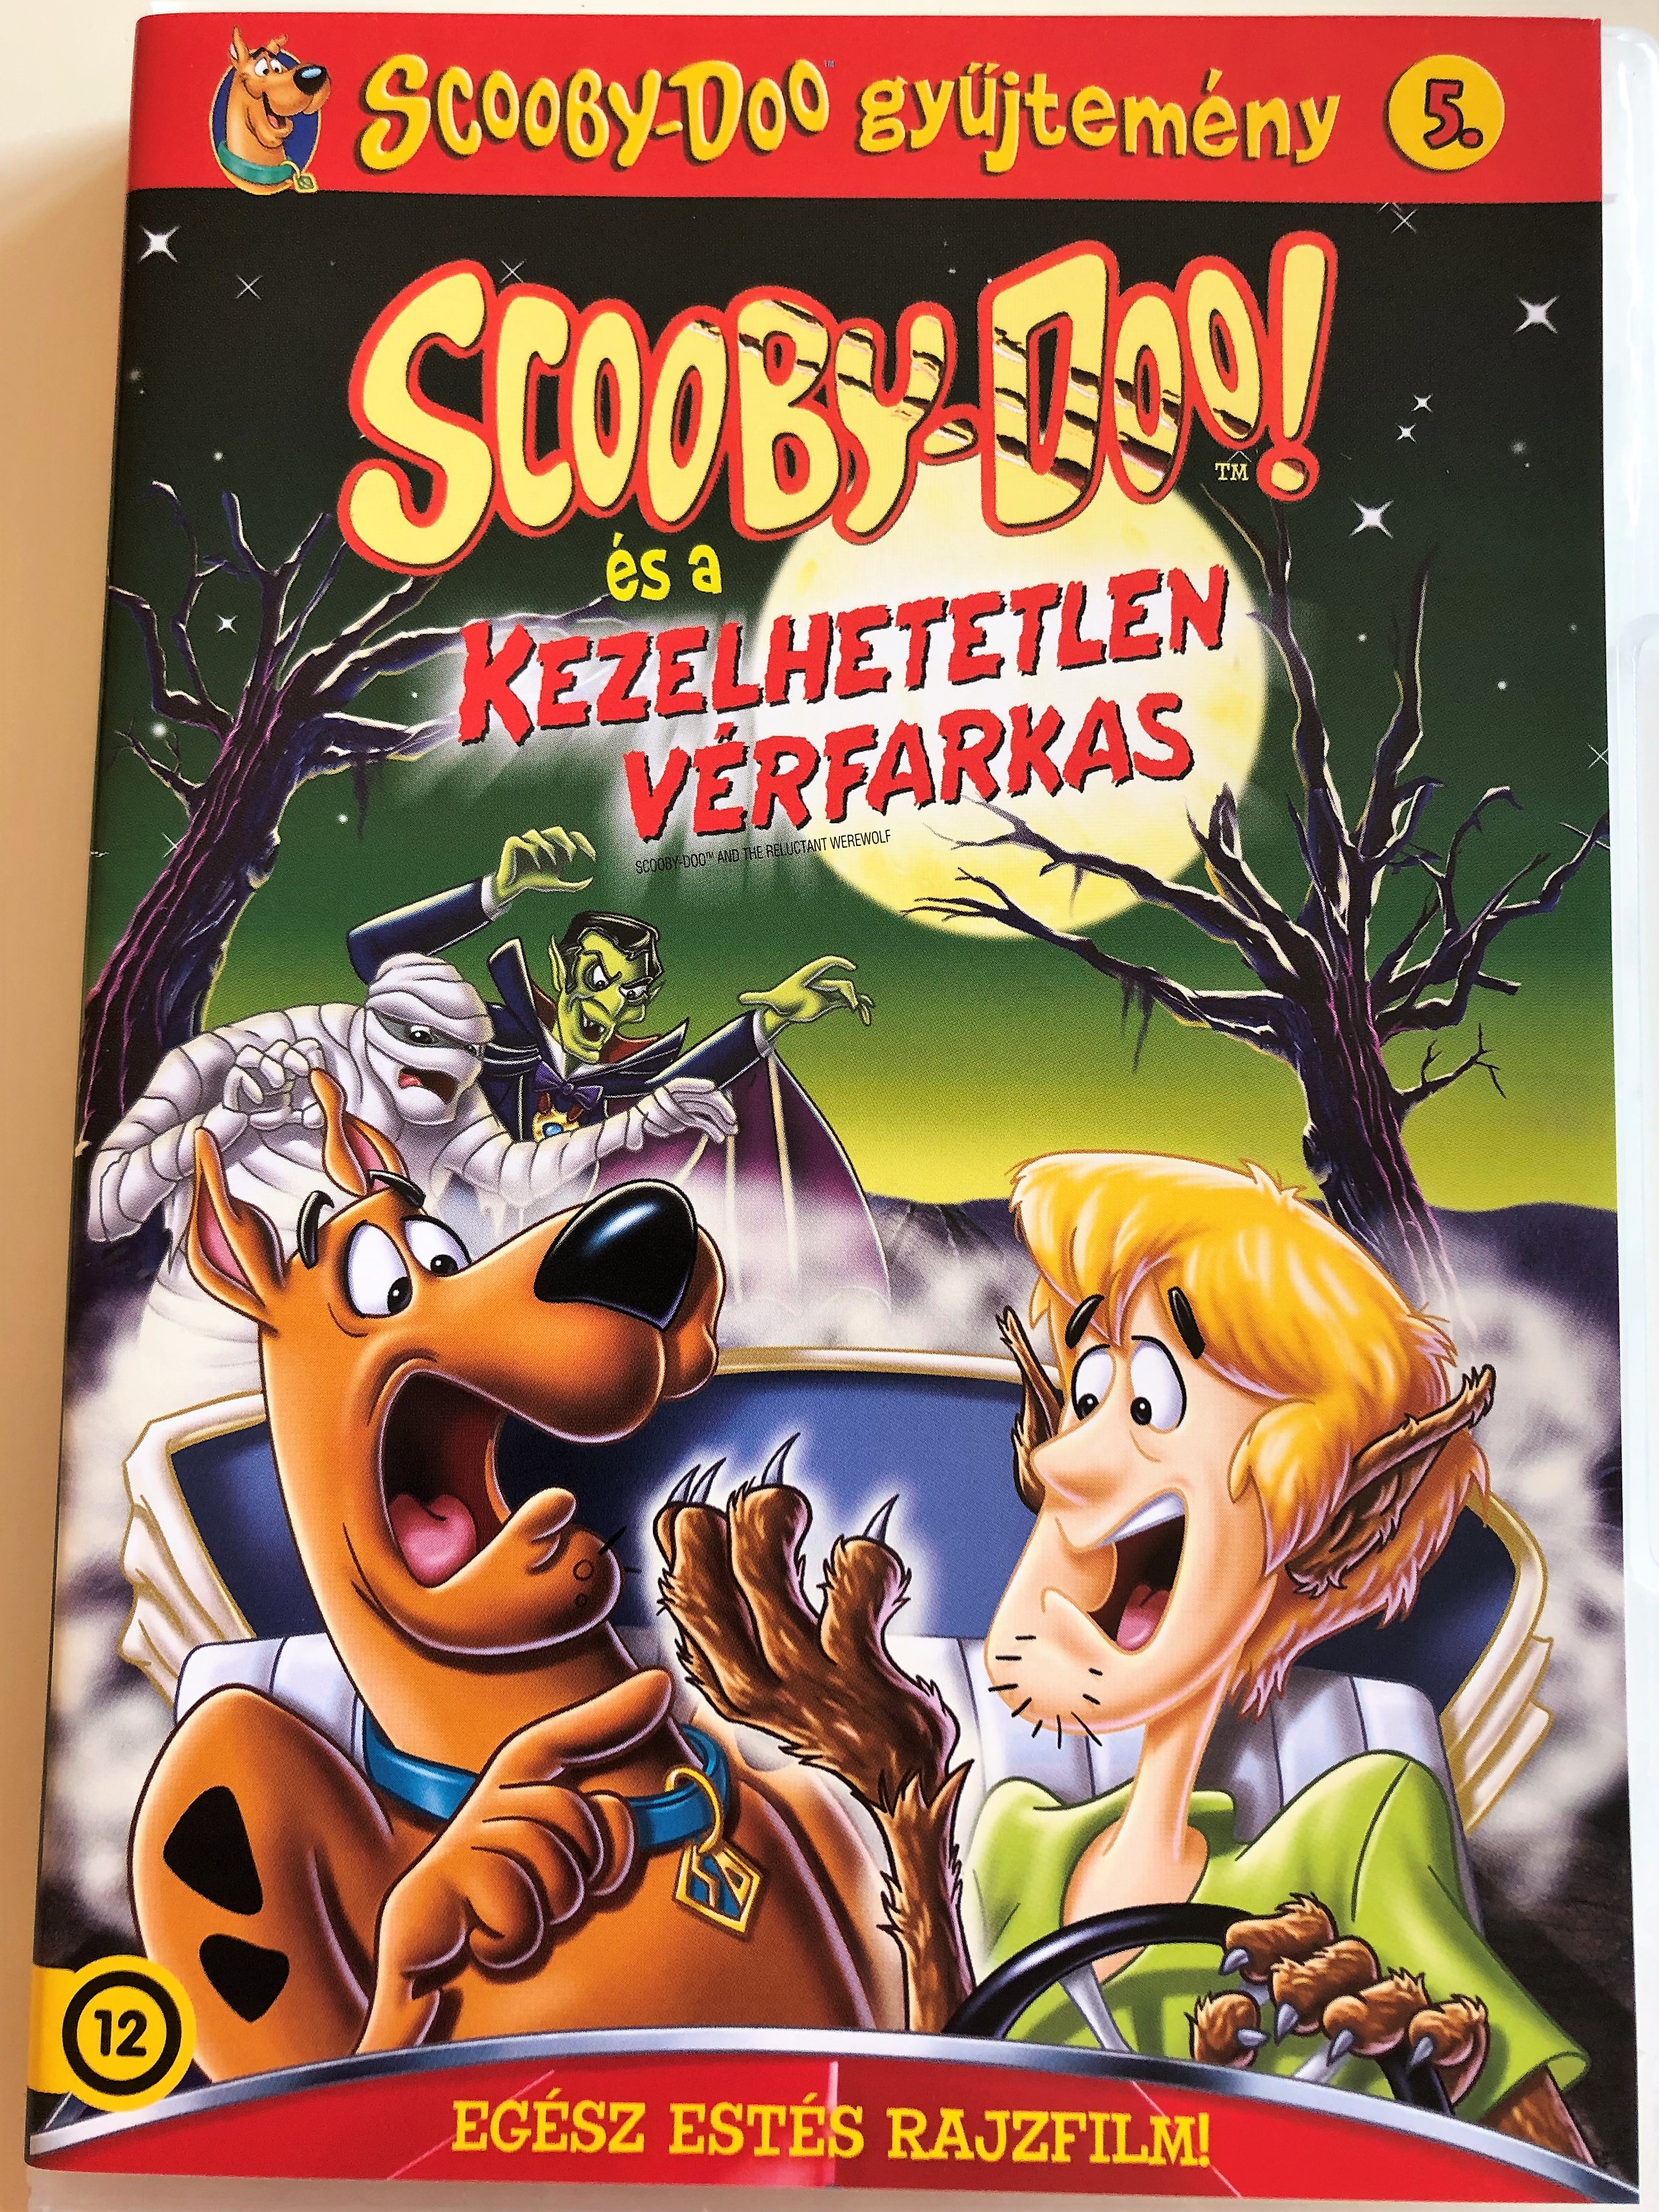 scooby-doo-and-the-reluctant-werewolf-dvd-1988-scooby-doo-s-a-kezelhetetlen-v-rfarkas-directed-by-ray-patterson-scooby-doo-collection-5-1-.jpg